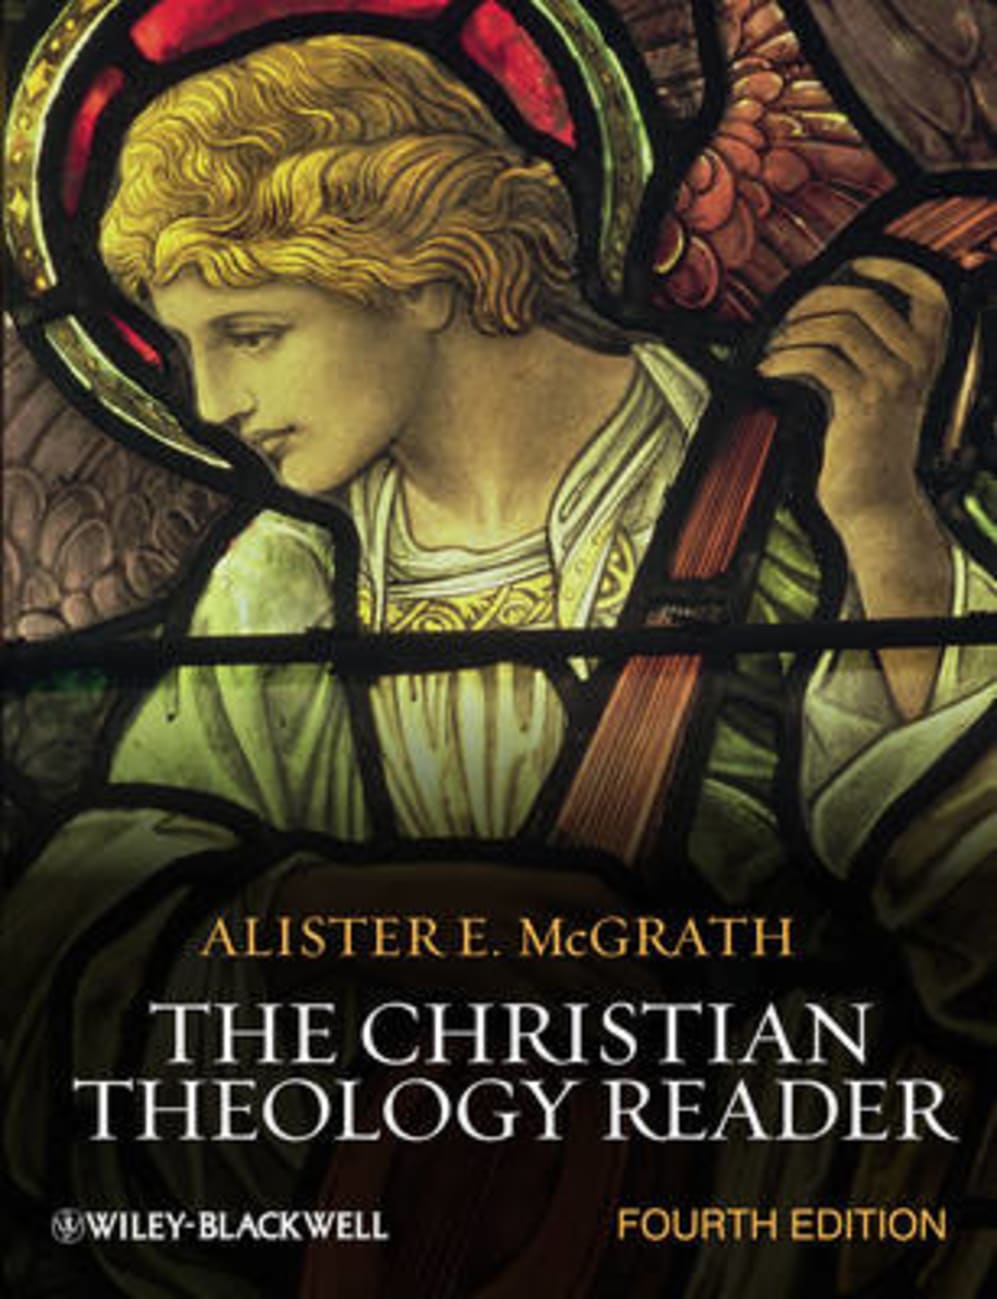 The Christian Theology Reader (4th Edition) Paperback